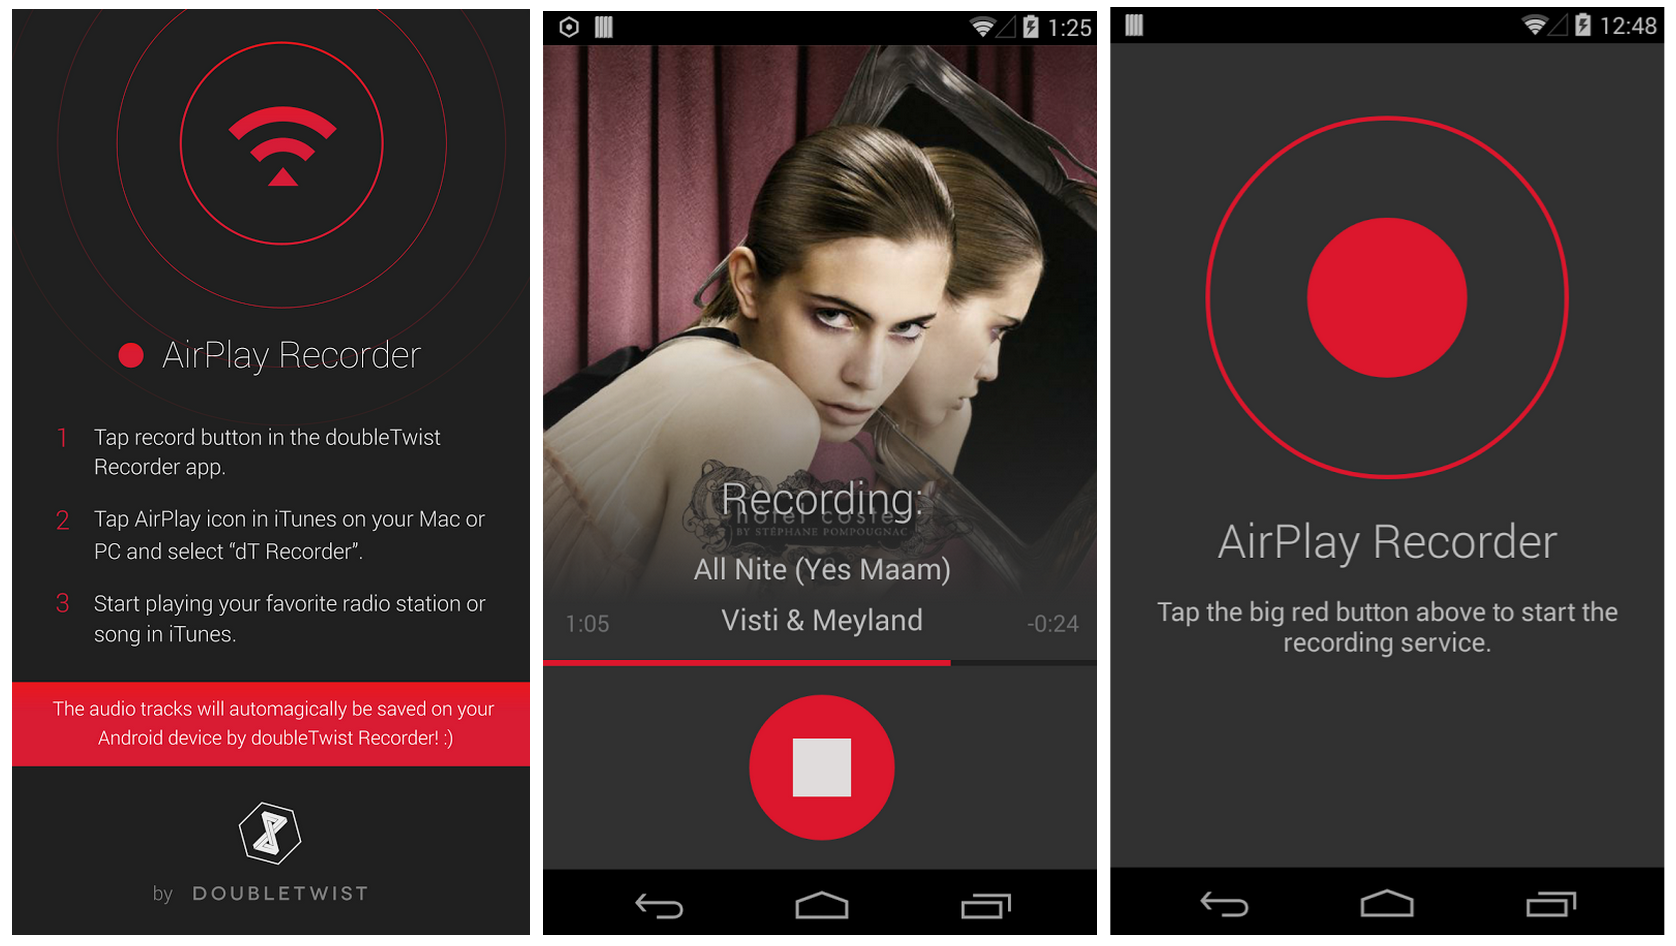 doubletwist releases itunes radio recorder to swipe songs for free image 1